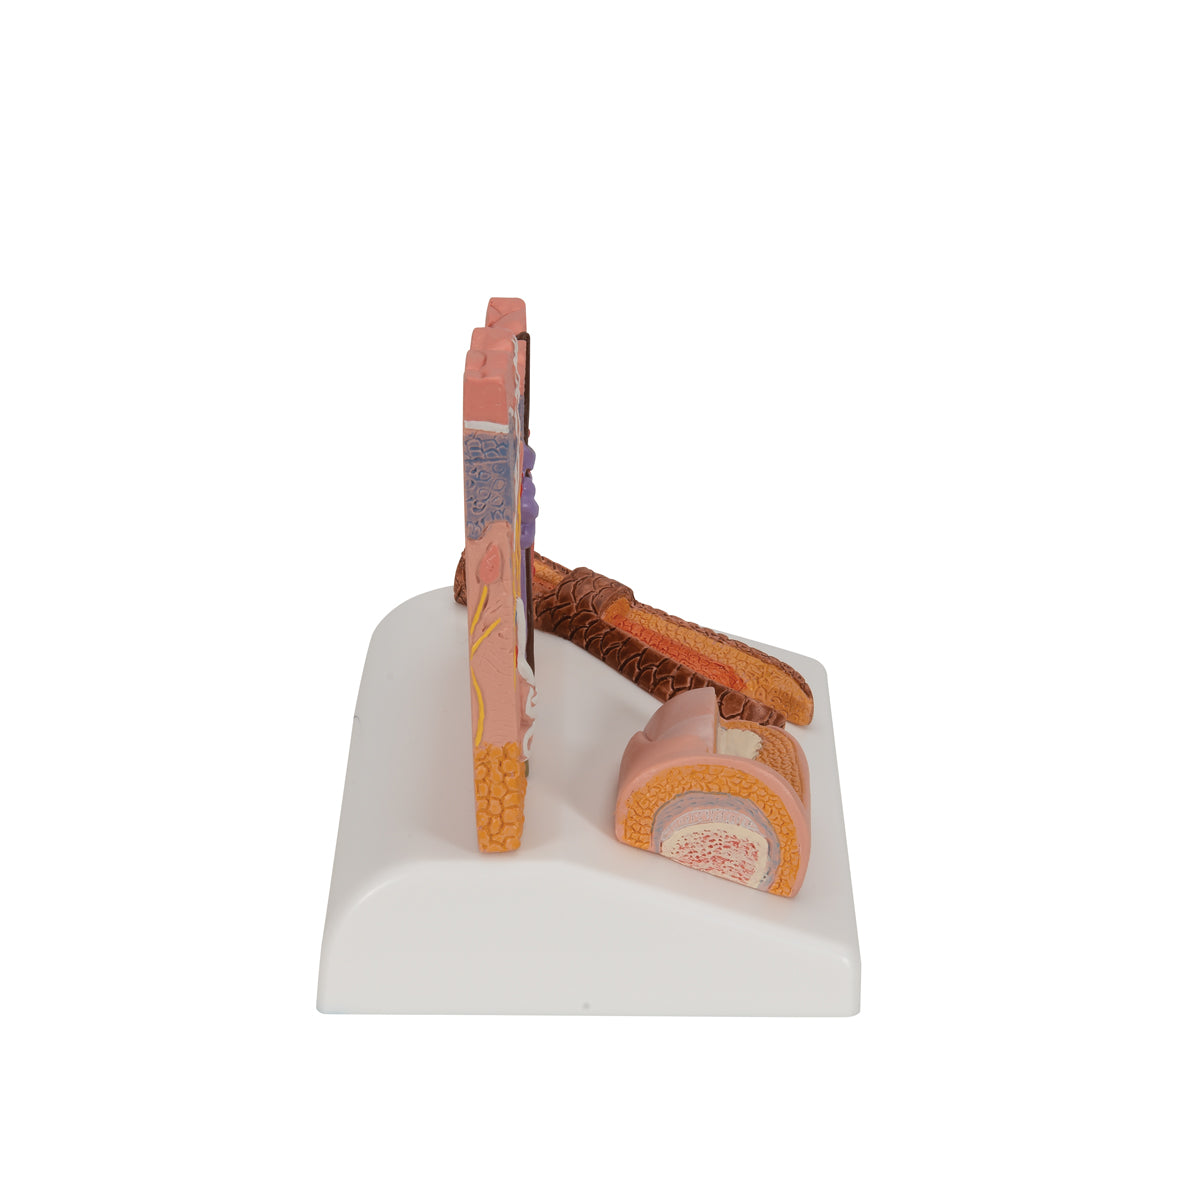 Skin model of 2 skin areas, a nail and a hair root assembled on a stand